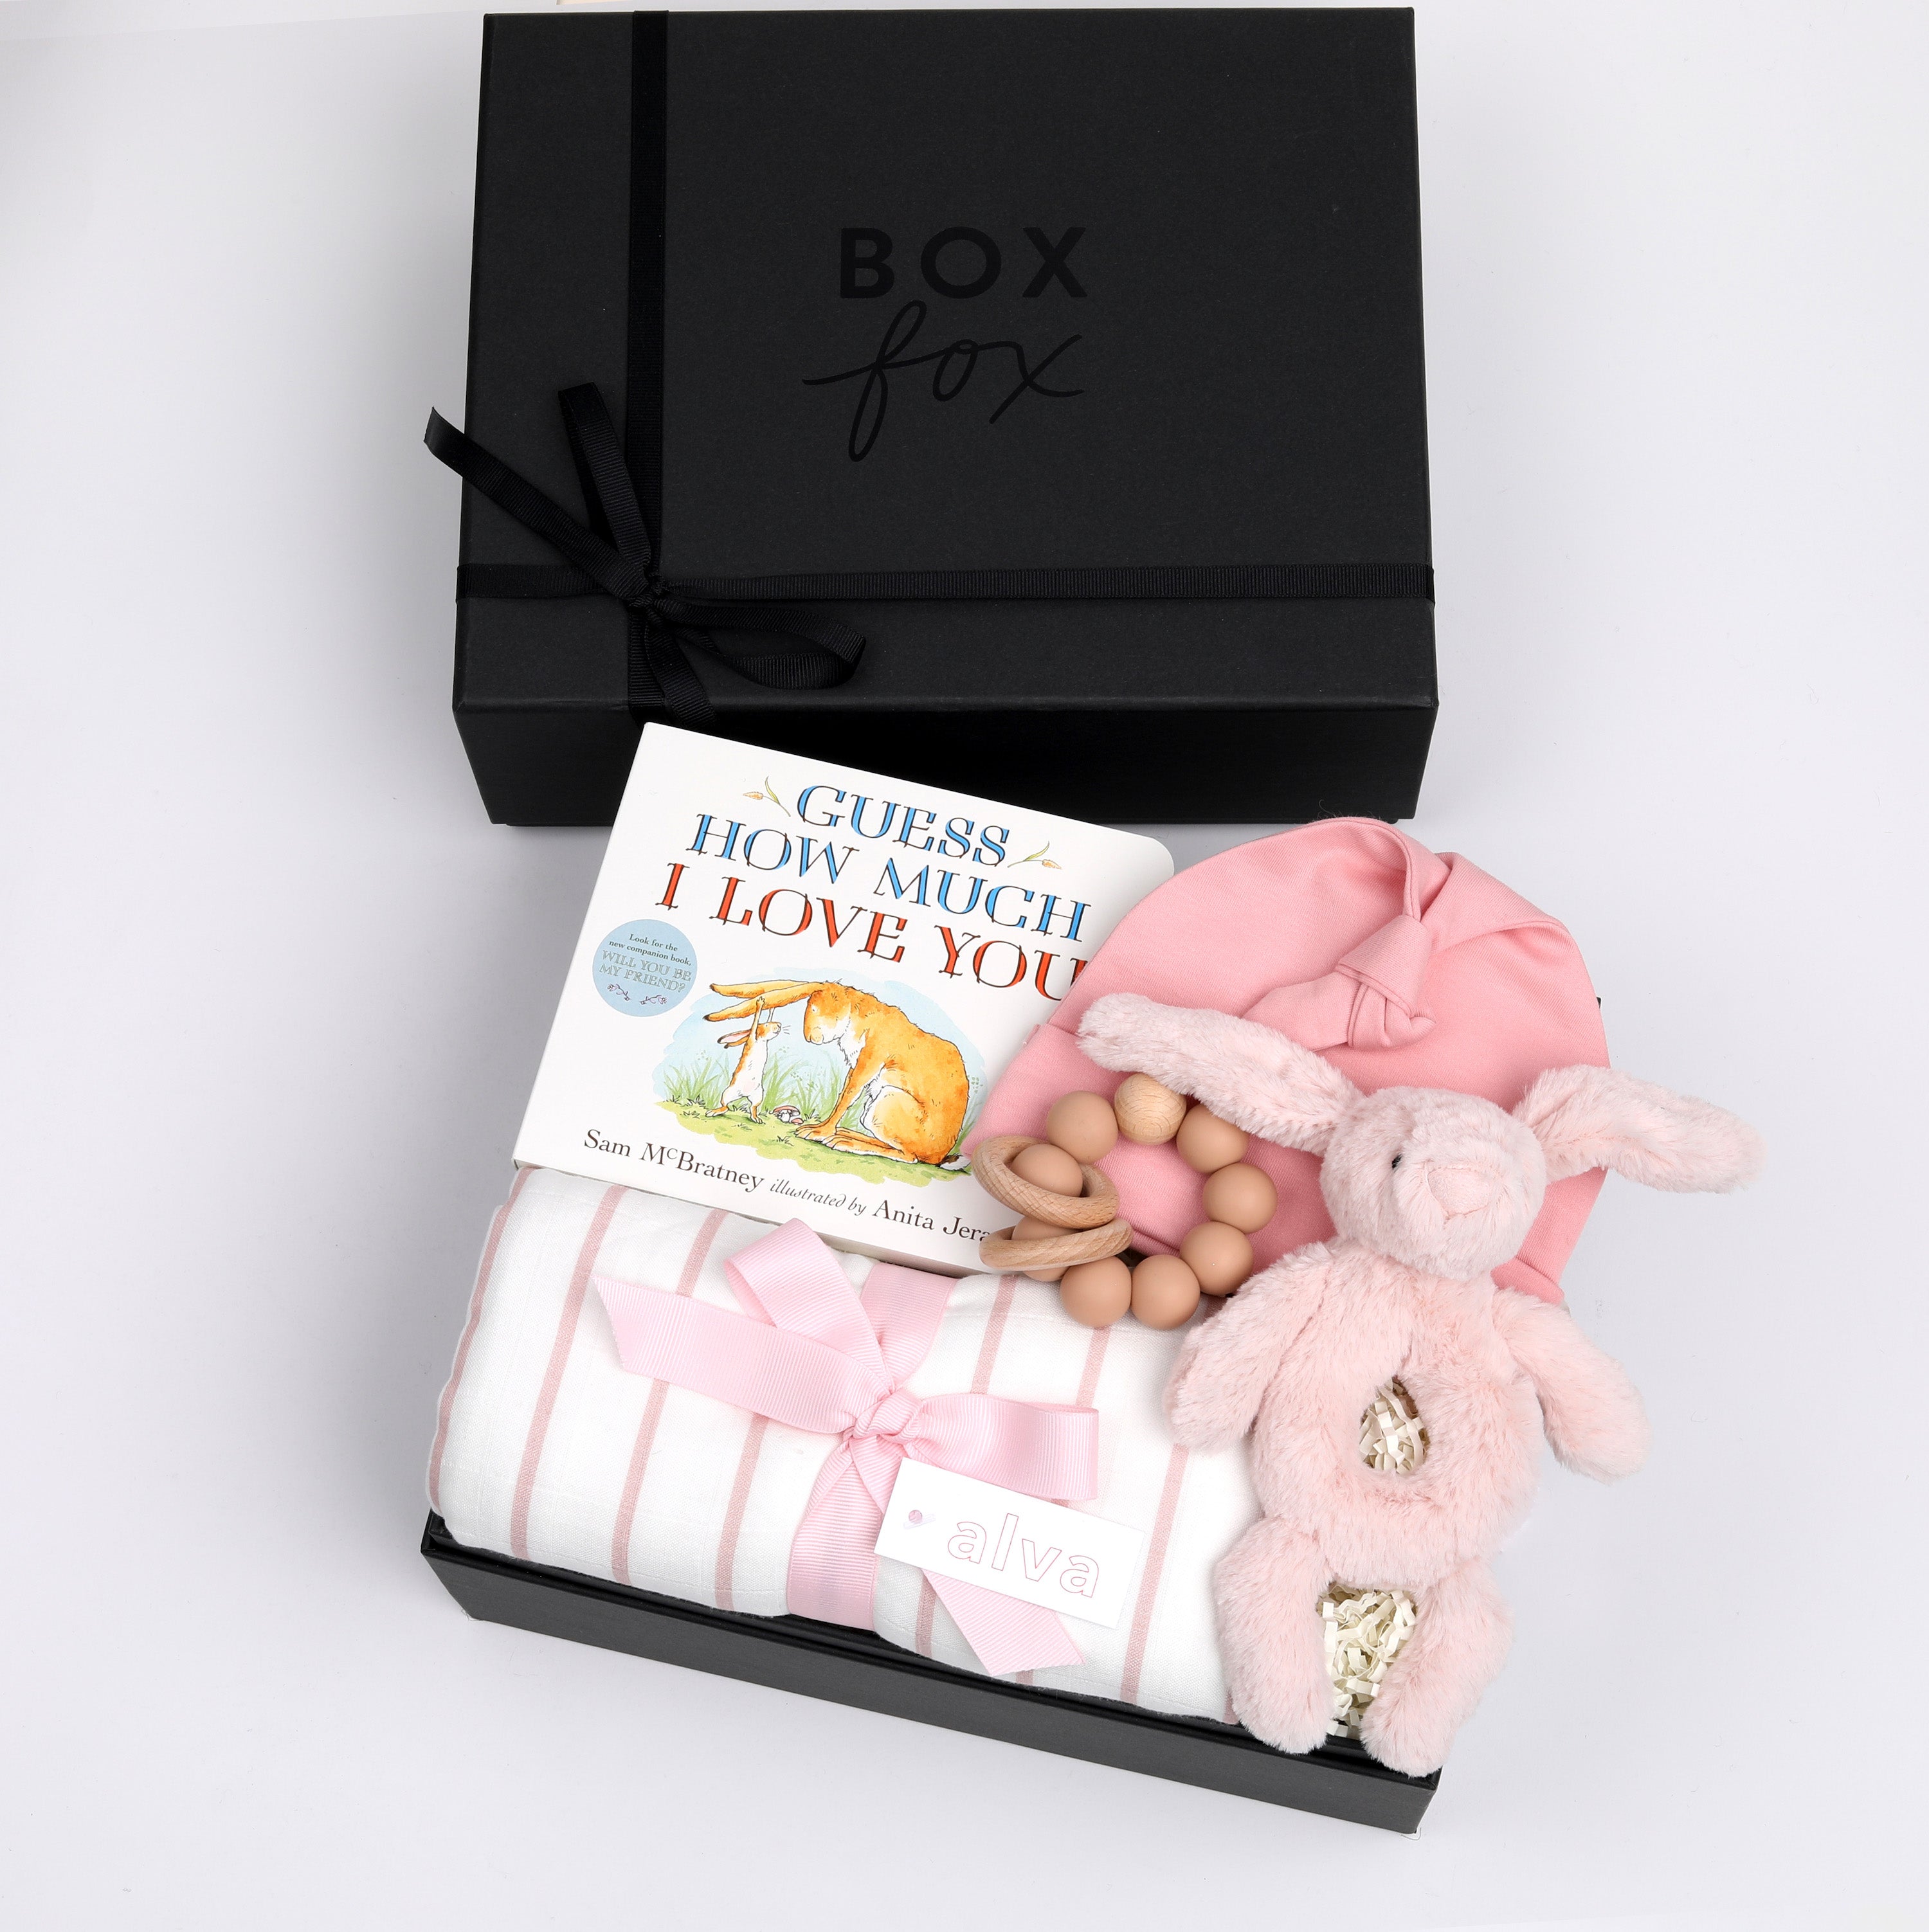 BOXFOX black gift box next to open box containing a book, swaddle, teether, baby beanie and bunny rattle.